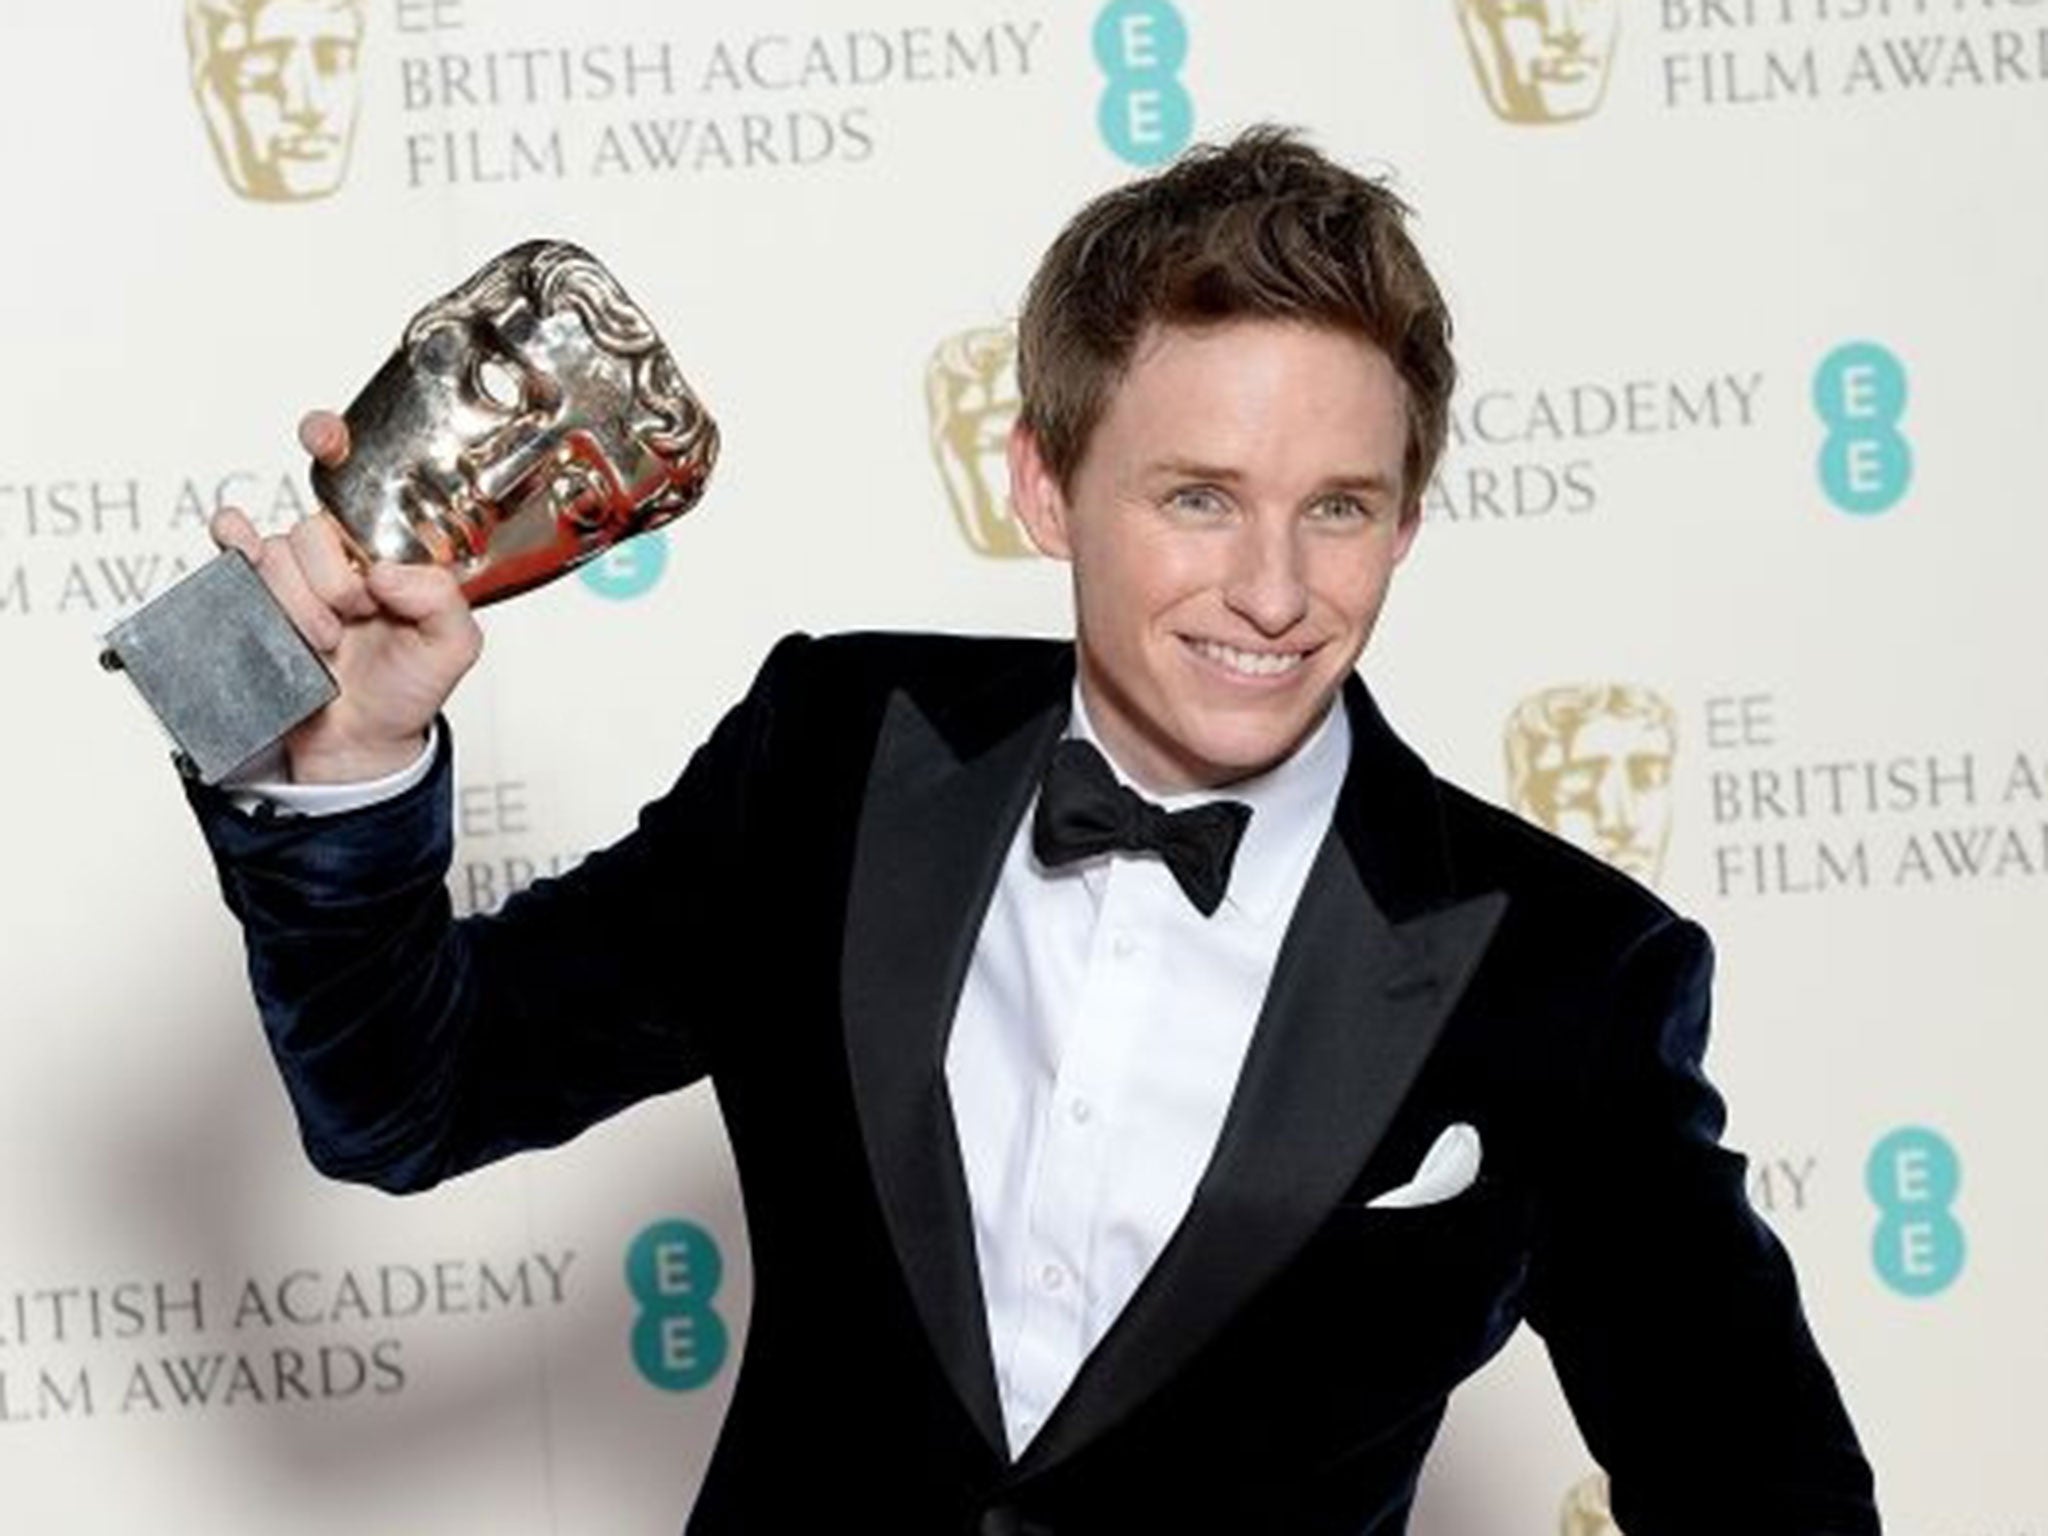 Eddie Redmayne with the Leading Actor Award for 'The Theory Of Everything' in the winners room at the EE British Academy Film Awards at The Royal Opera House on February 8, 2015 in London, England.